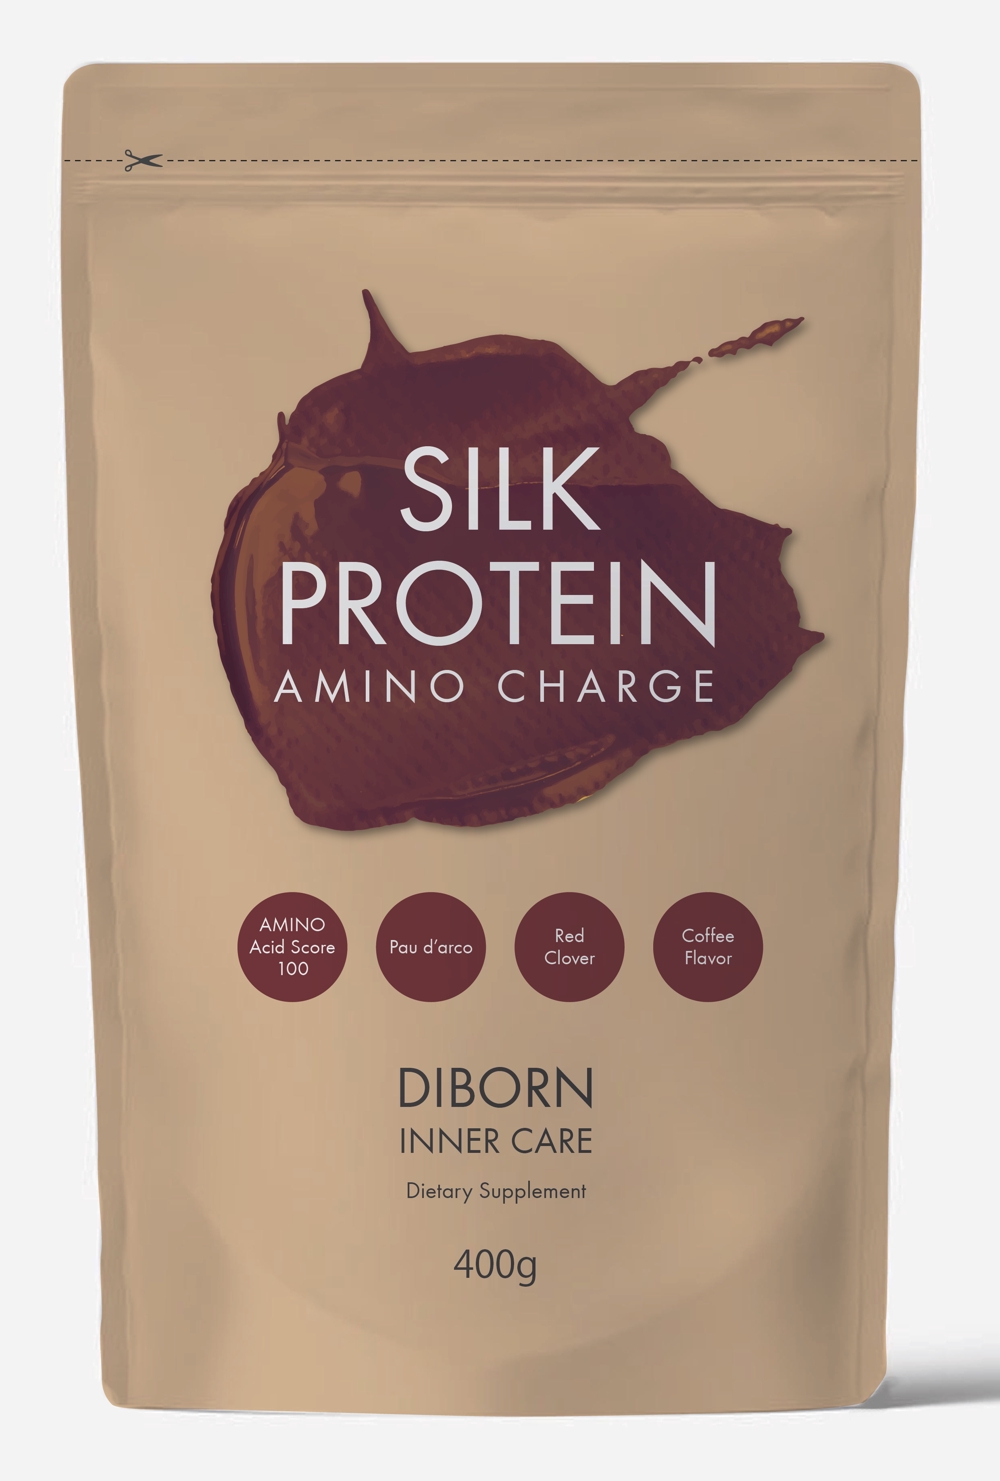 SILK PROTEIN03-01.png